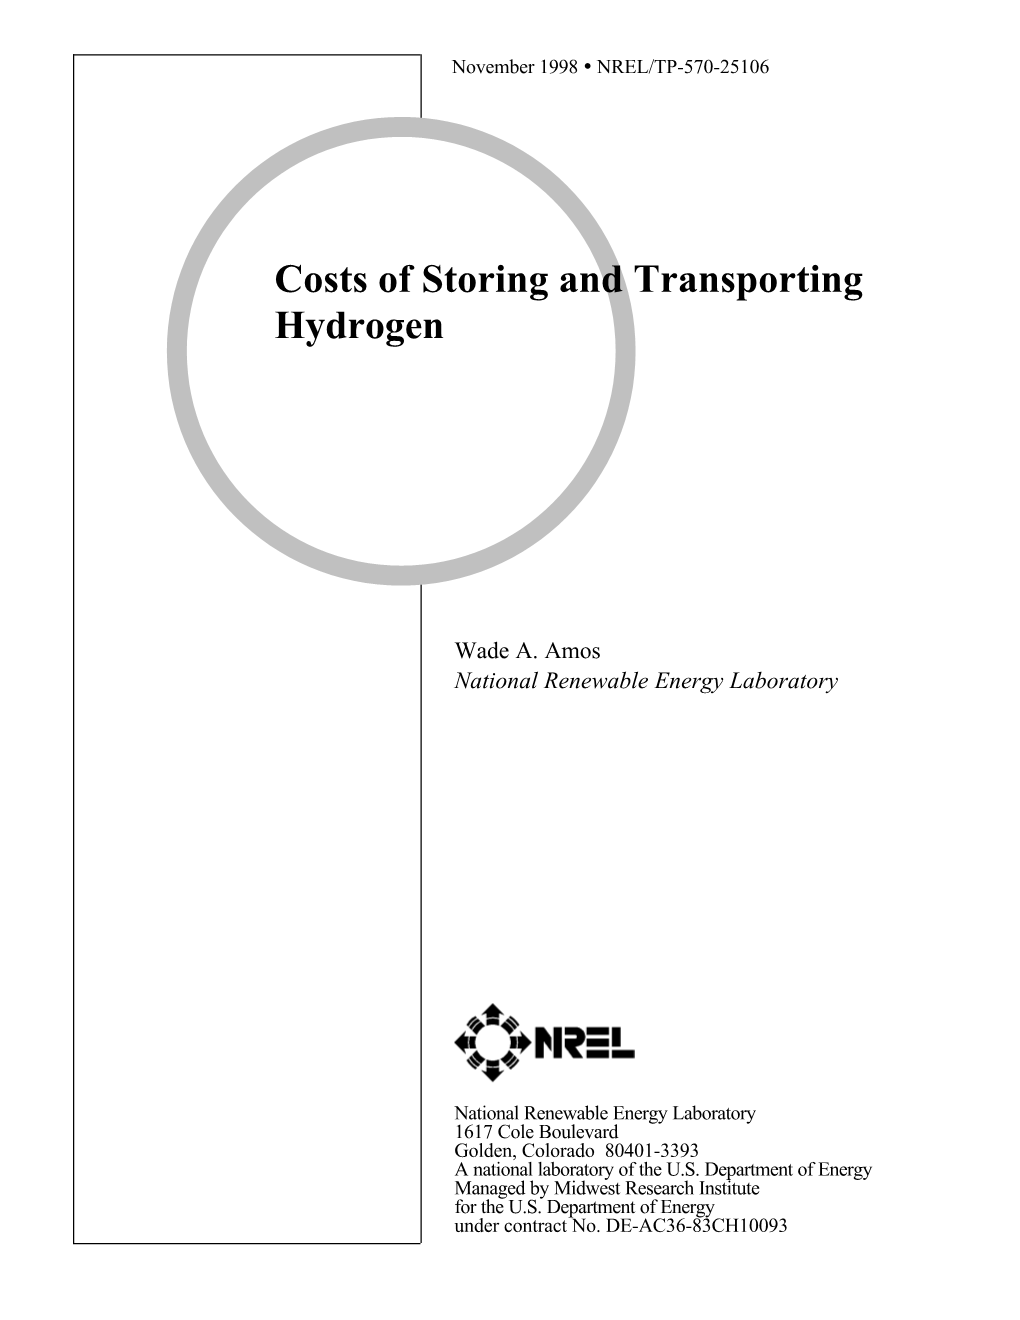 Costs of Storing and Transporting Hydrogen